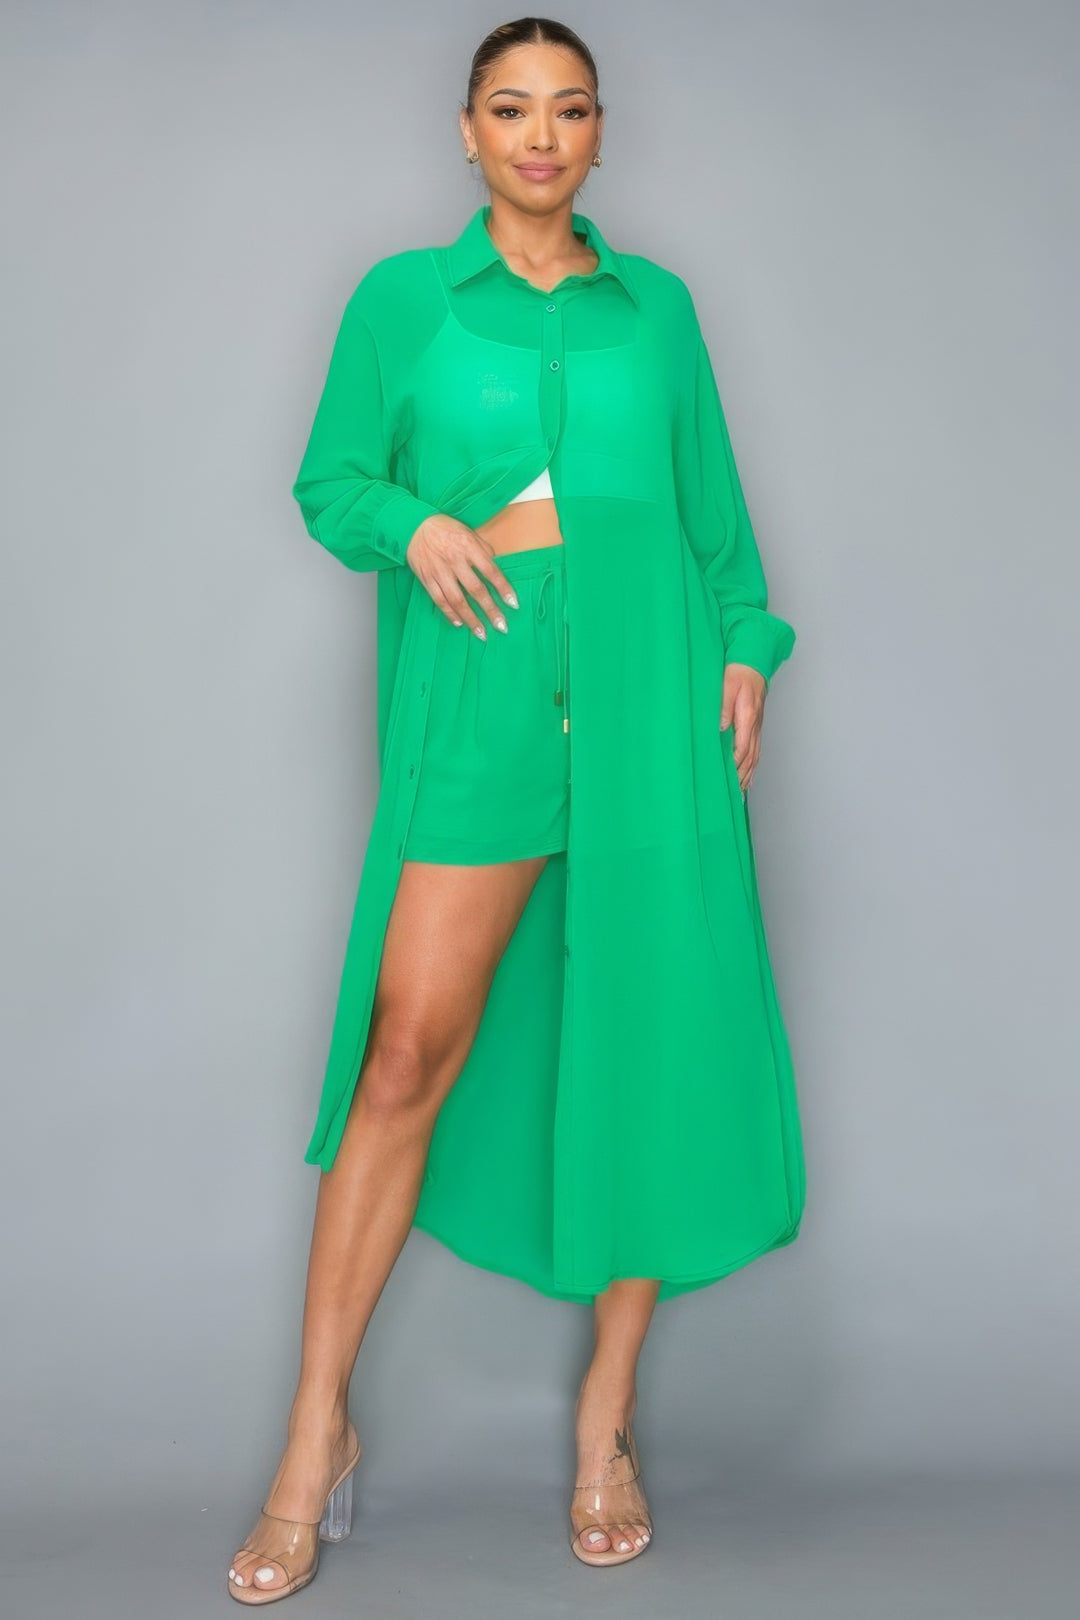 Chic Chiffon Green Top With Short Set with Long Sleeve & Side Slits